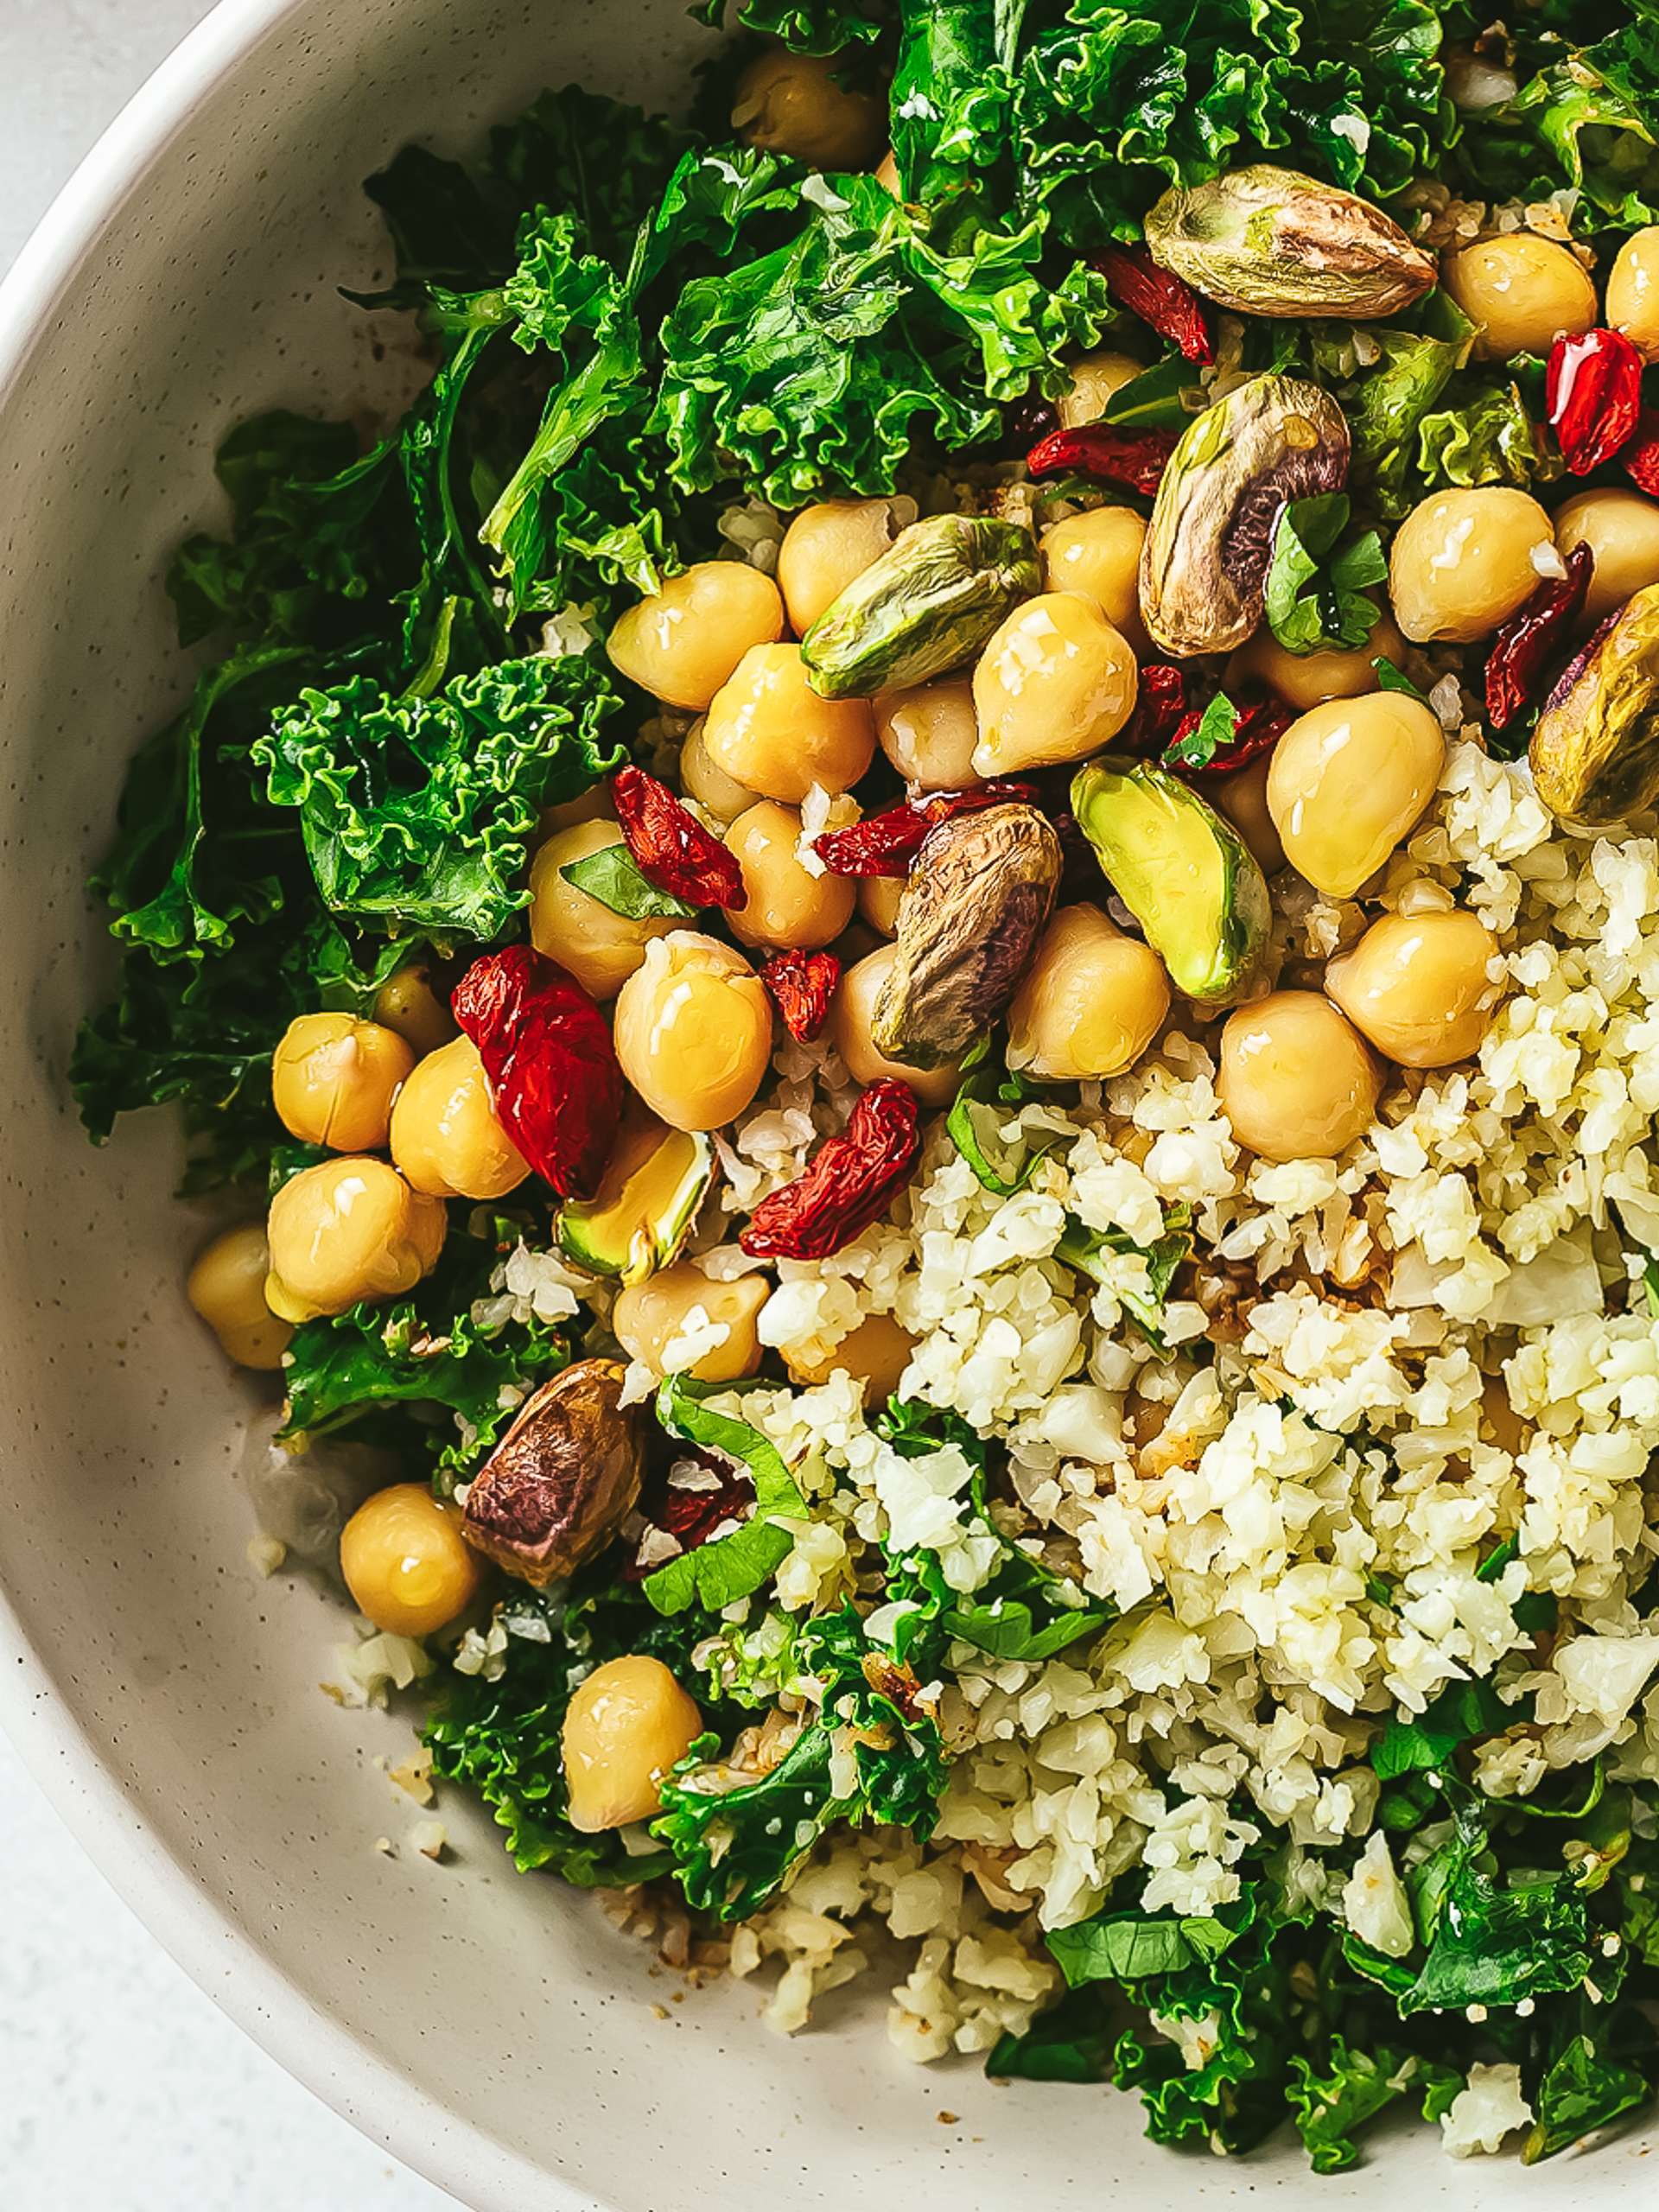 5 Steps To Build Your Healthy Buddha Bowl